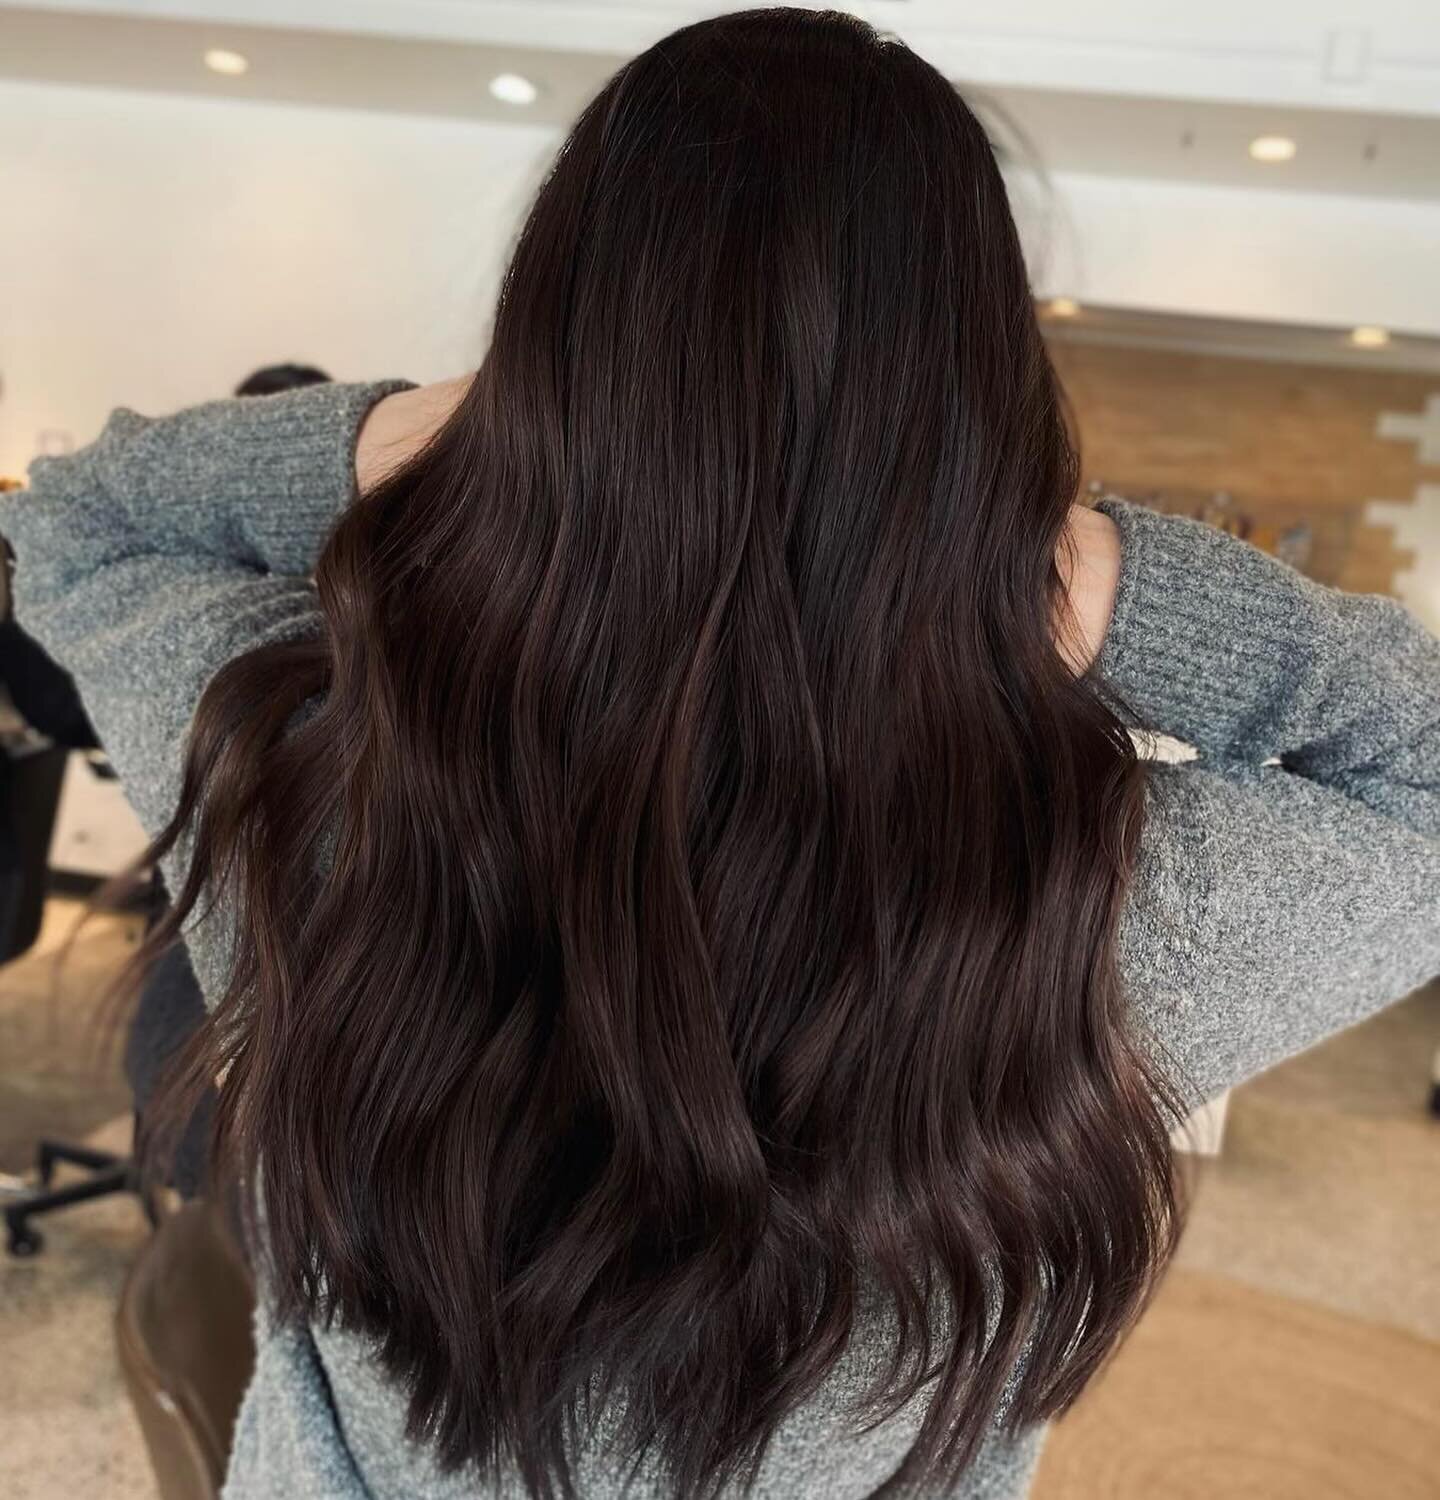 A moment for the brunettes!

@hairxbecca loves to color a rich brunette- so if you&rsquo;re looking for a brunette expert, schedule an appointment 😉 you&rsquo;ll be glad you did!